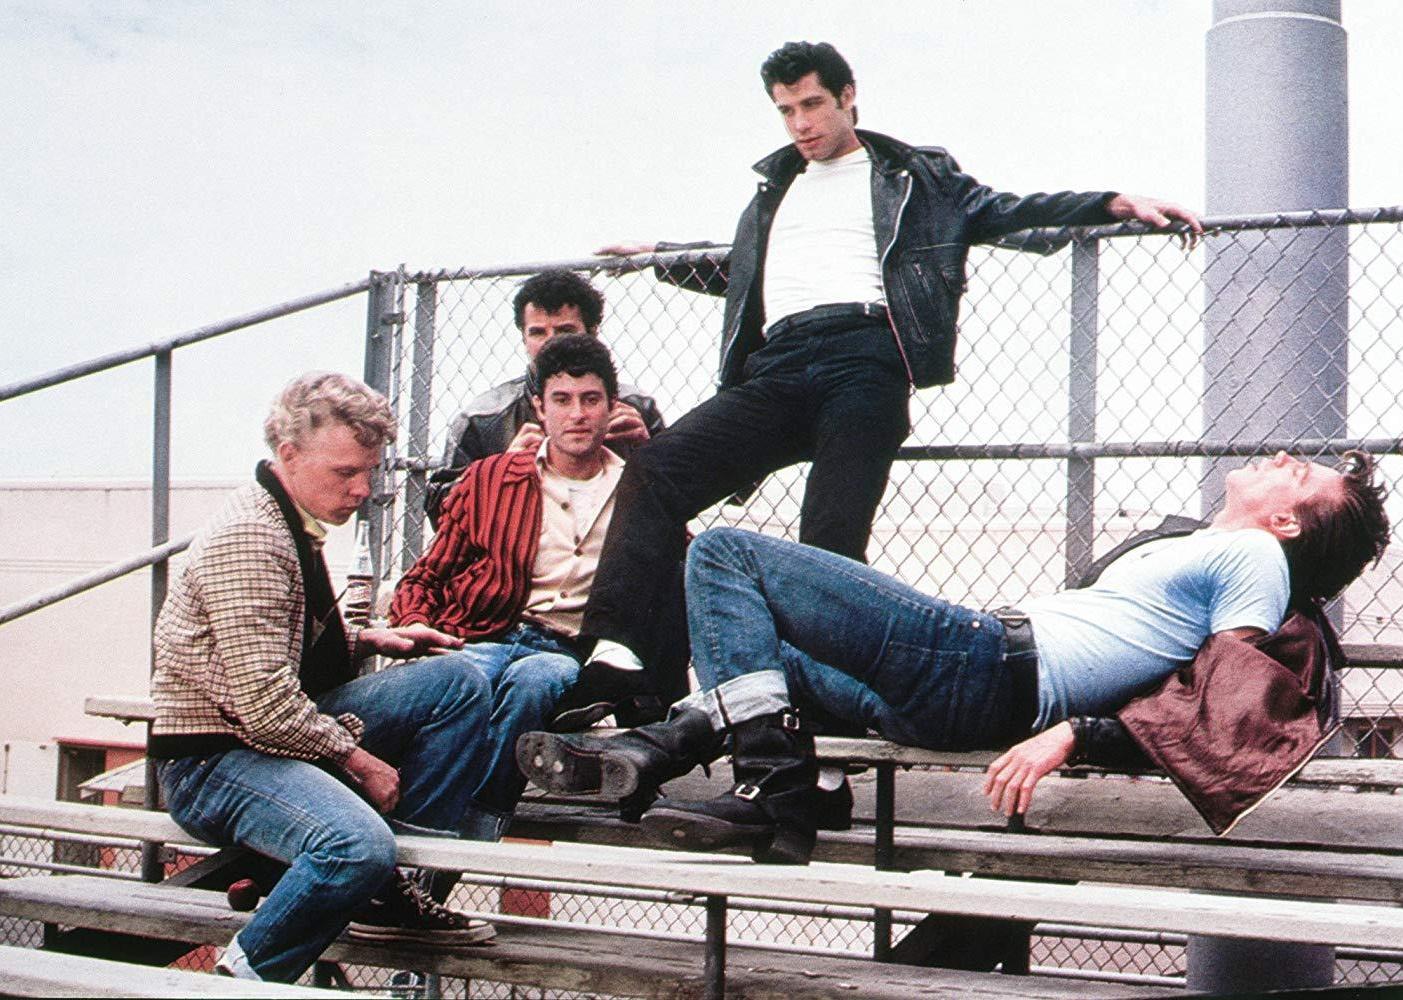 John Travolta and a group of guy friends hanging out on the bleachers.